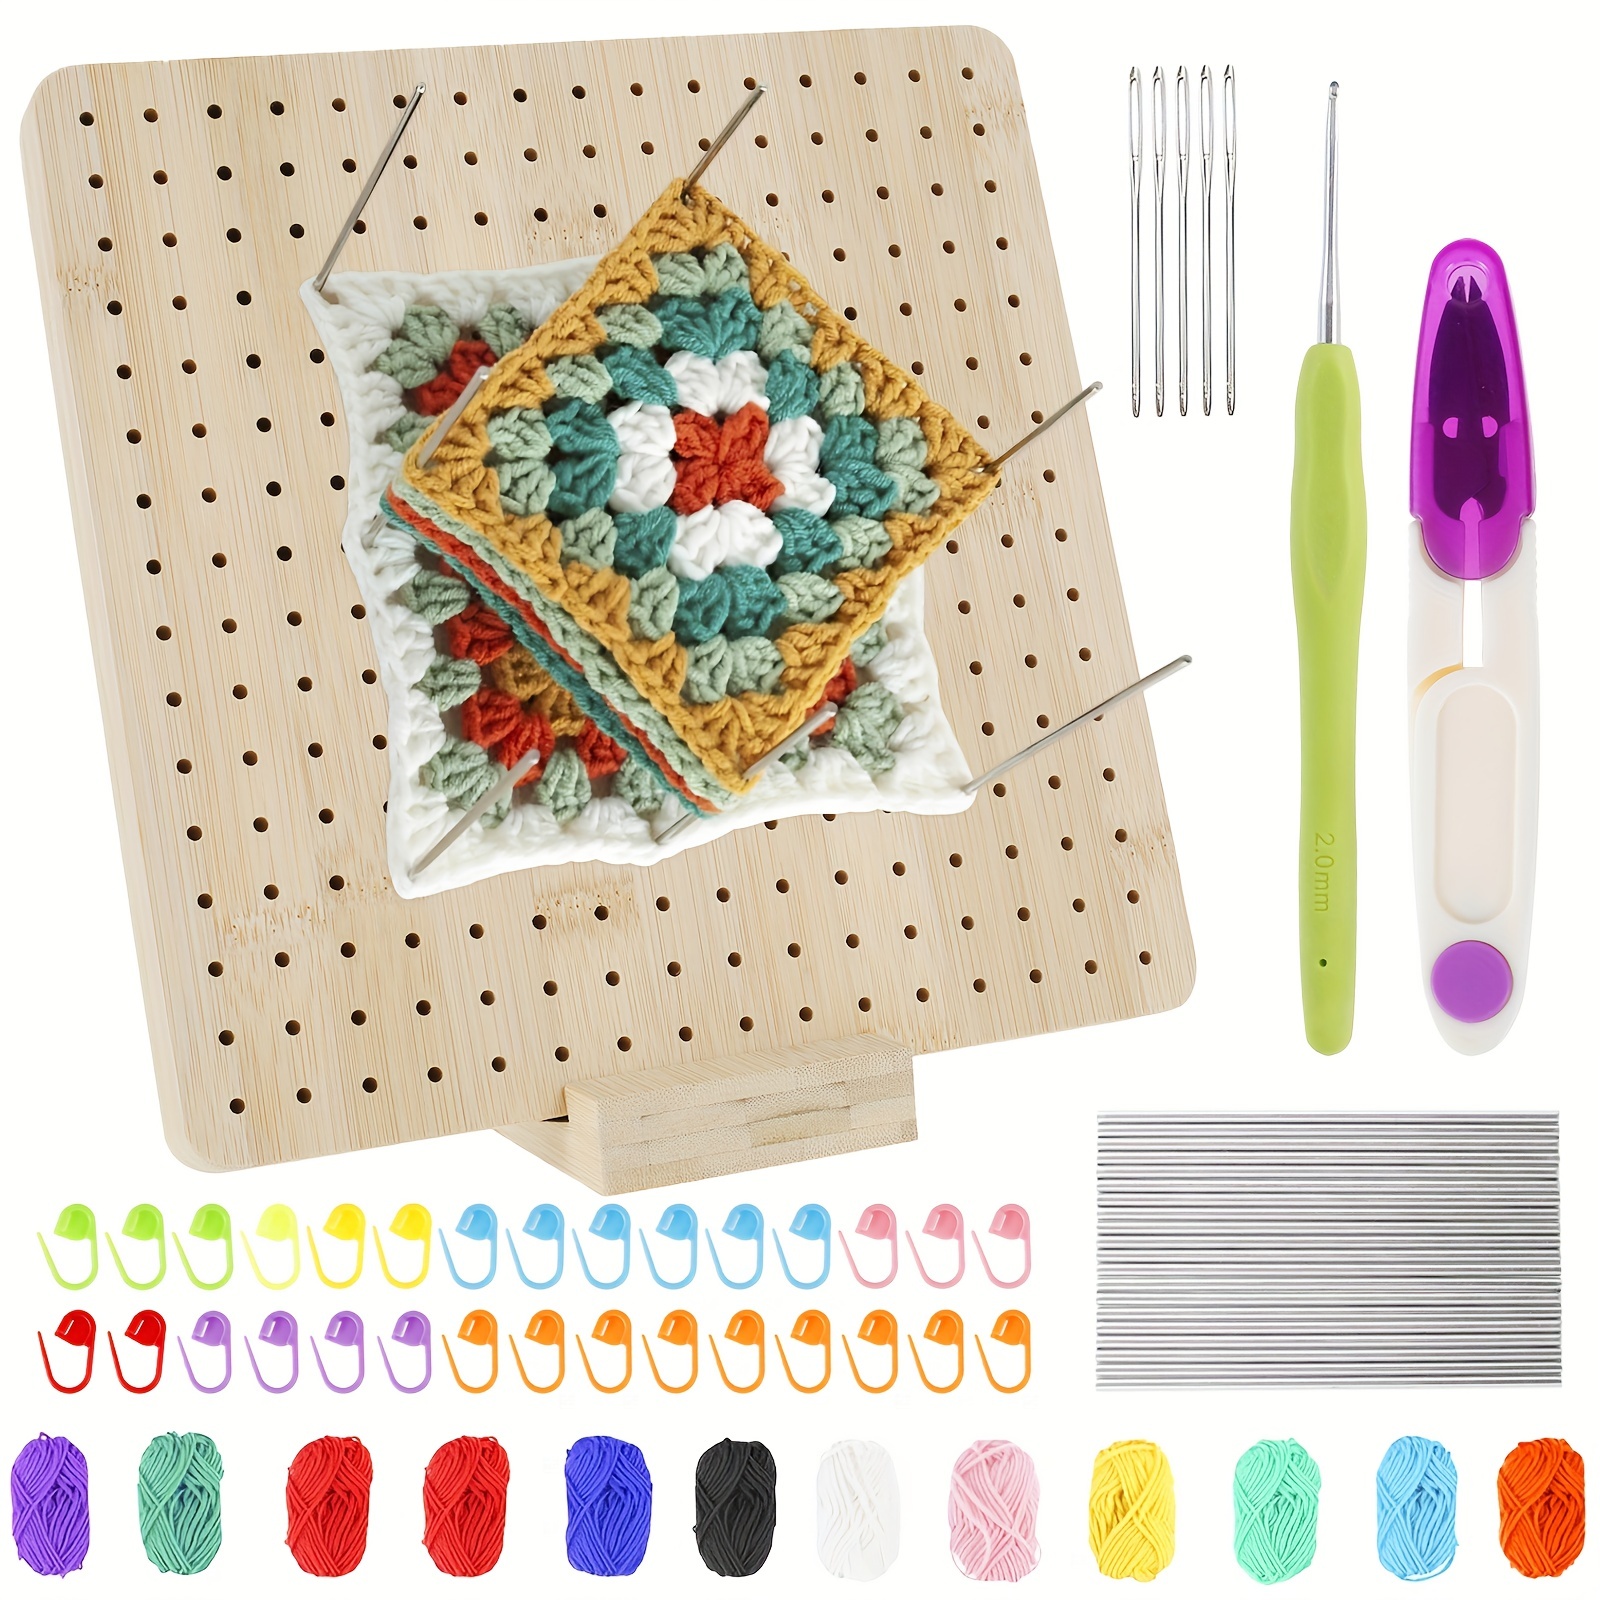 Wood Crochet Blocking Board Kit With Stainless Steel Rod Pins For Knitting  Granny Squares Crochet Board Crafting Lovers Gifts - AliExpress